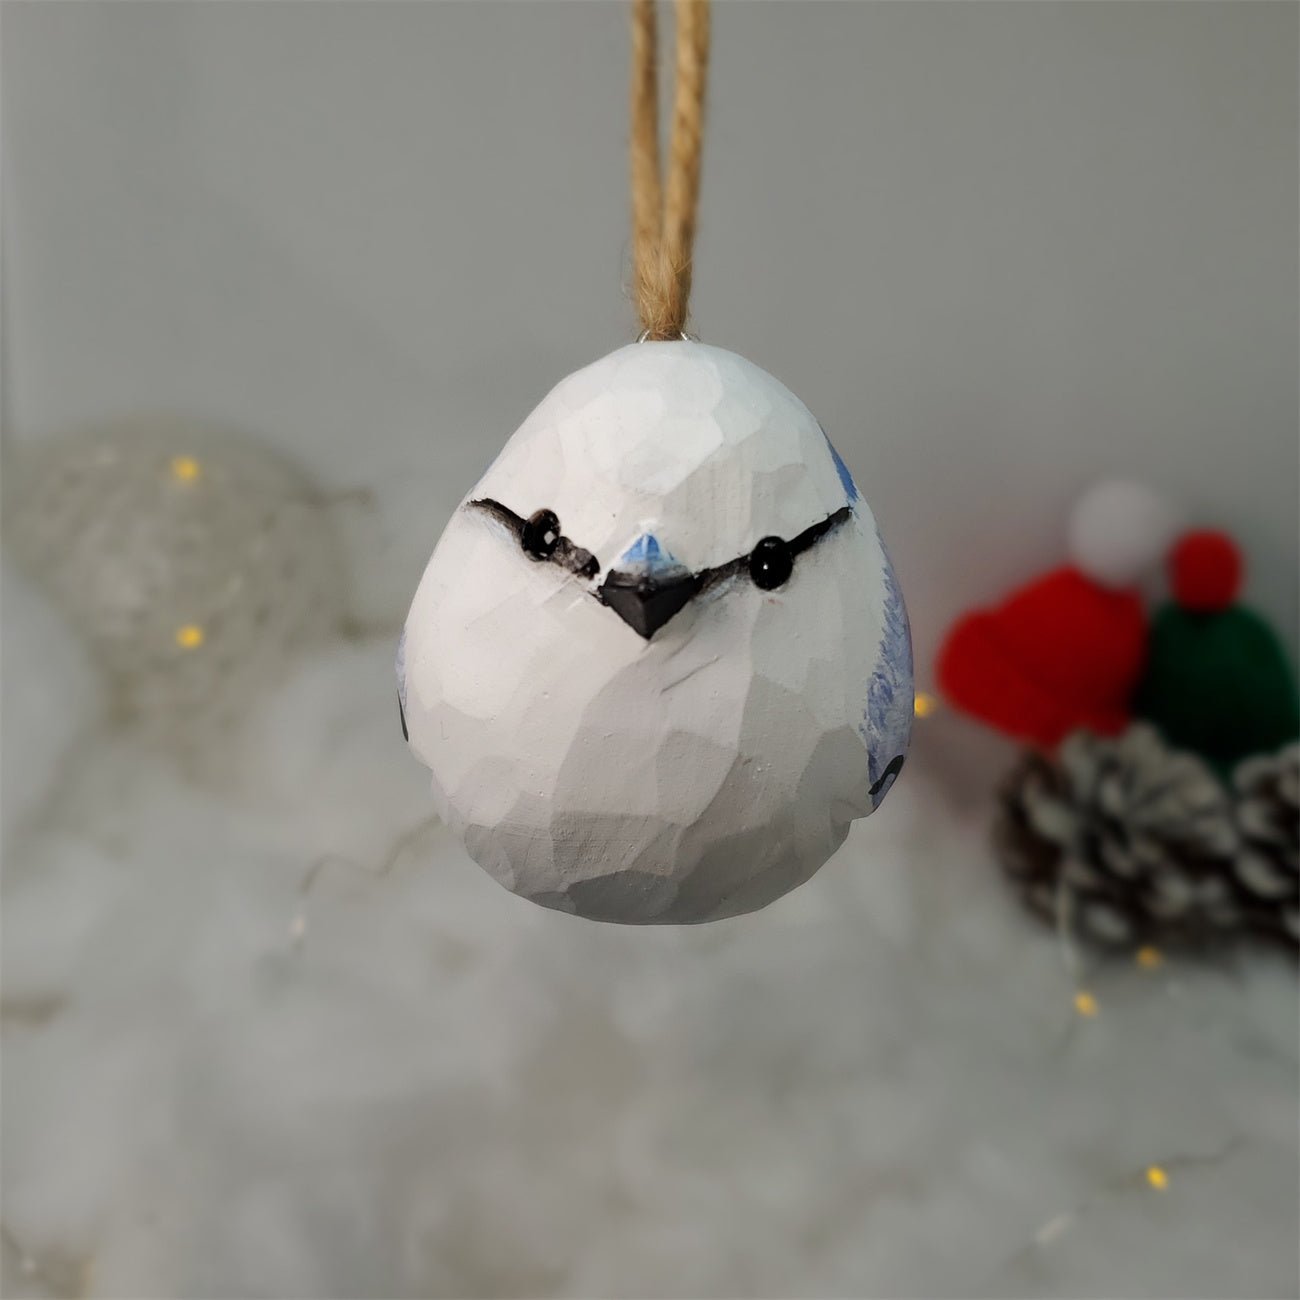 Azure tit Carved and Painted Wooden Bird Ornaments - PAINTED BIRD SHOP